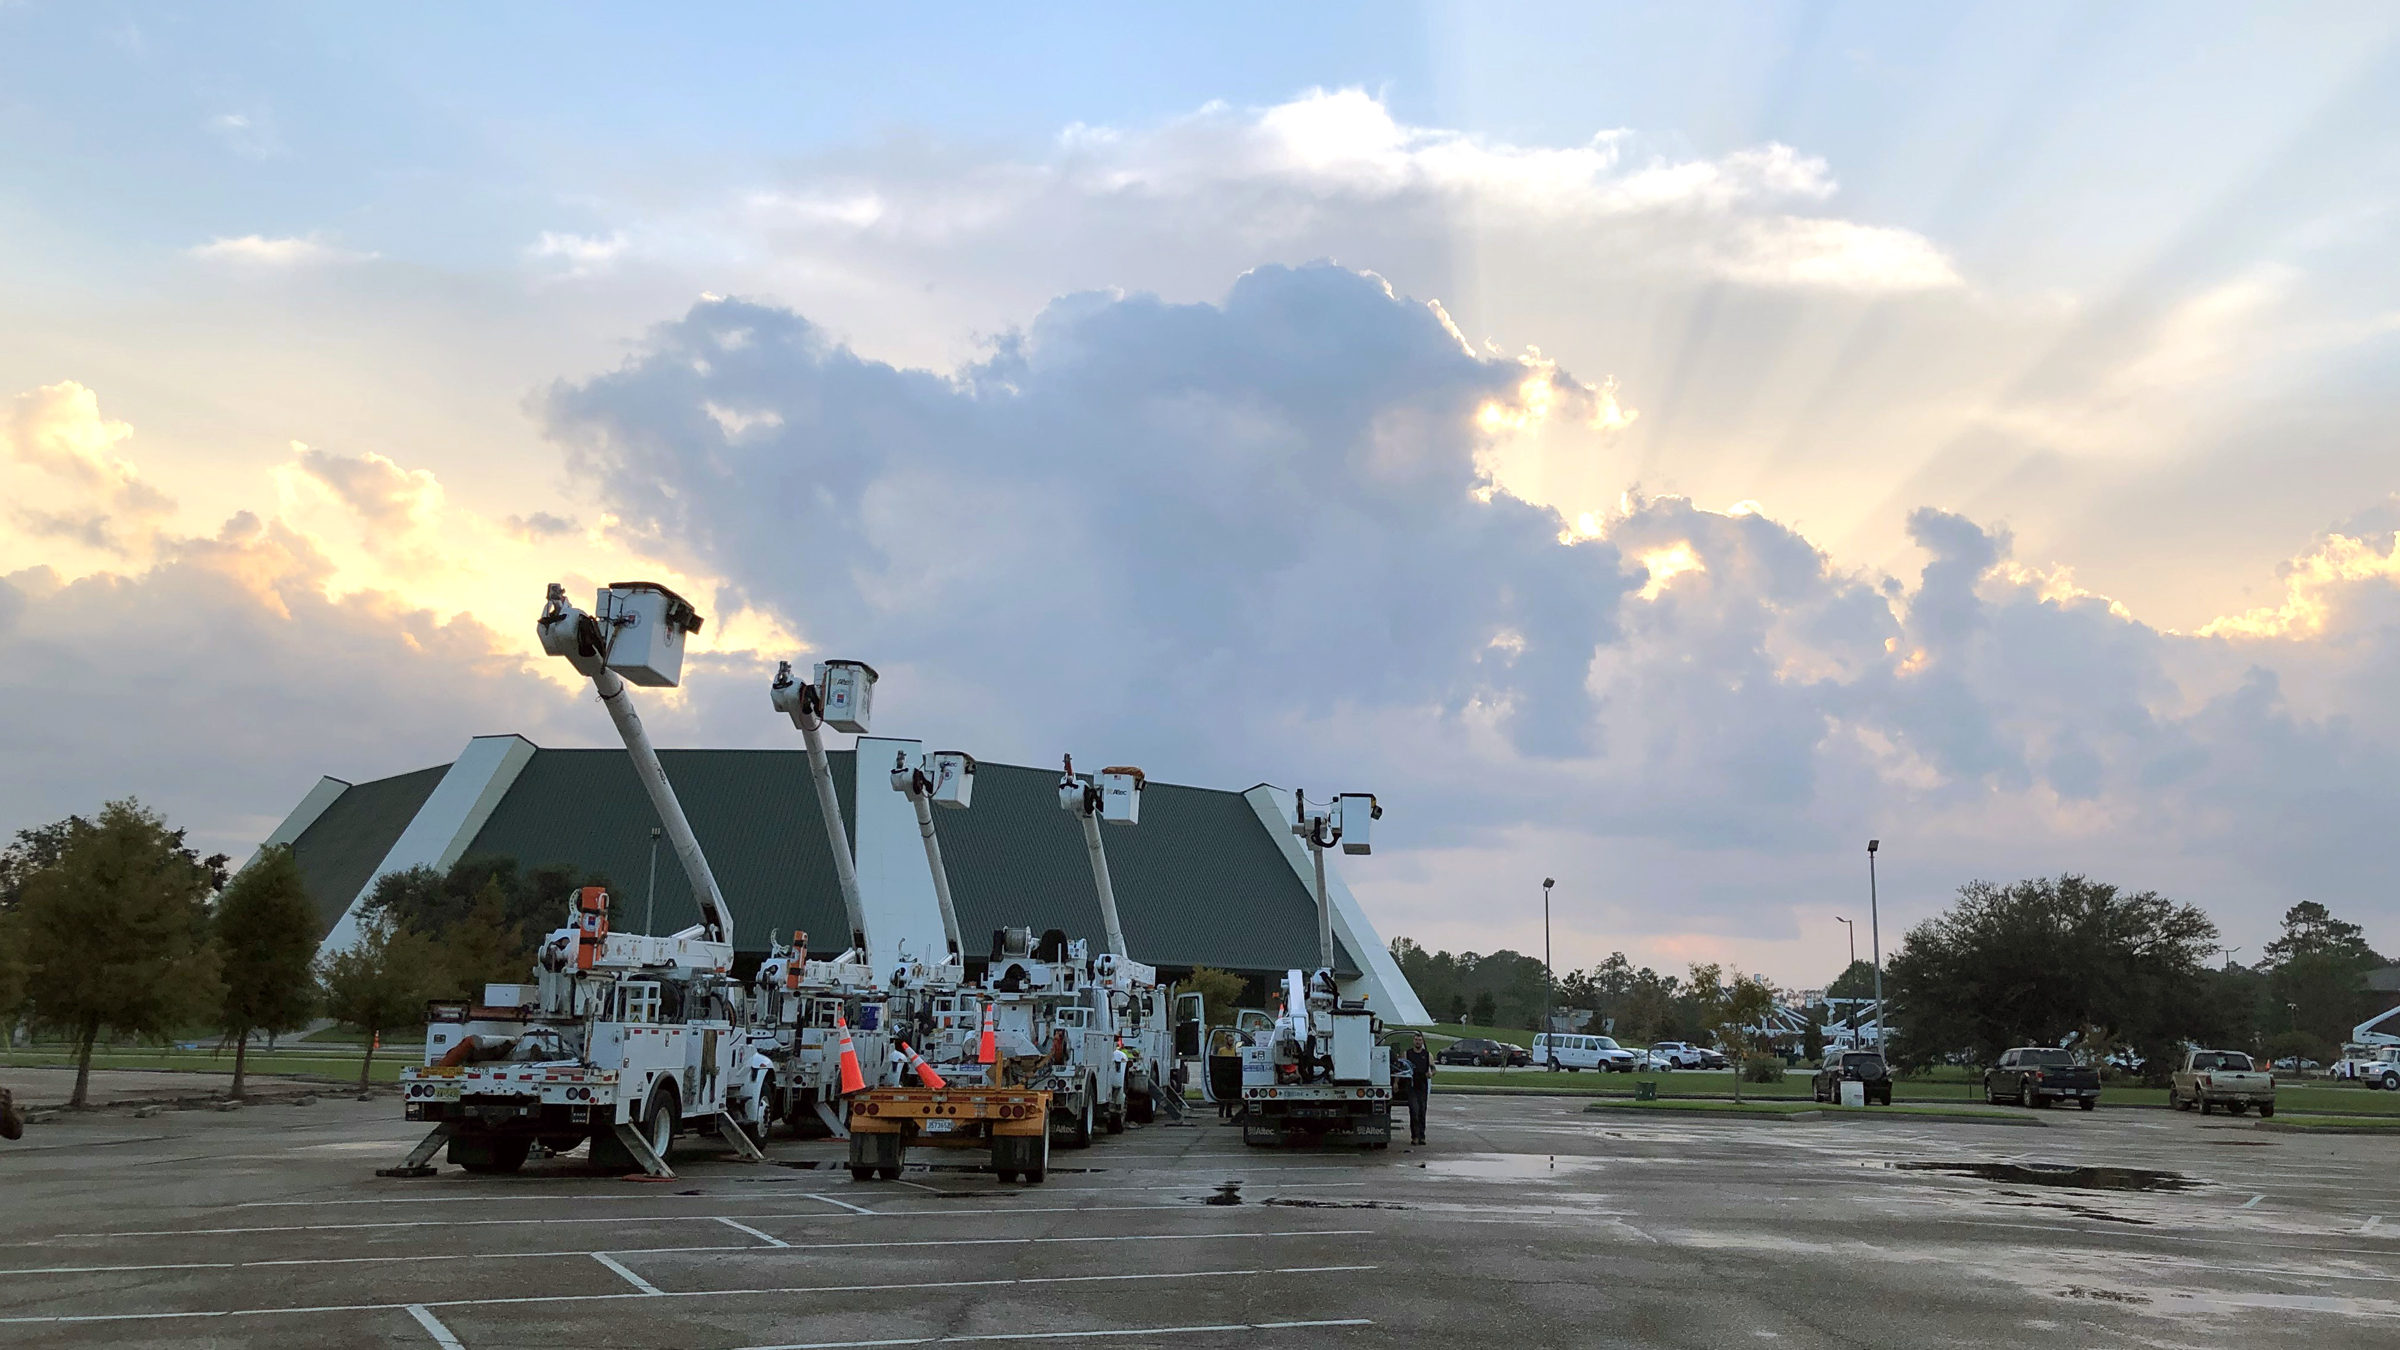 The sun shines behind clouds overlooking the University Center and bucket trucks at Southeastern in Hammond, Louisiana. 